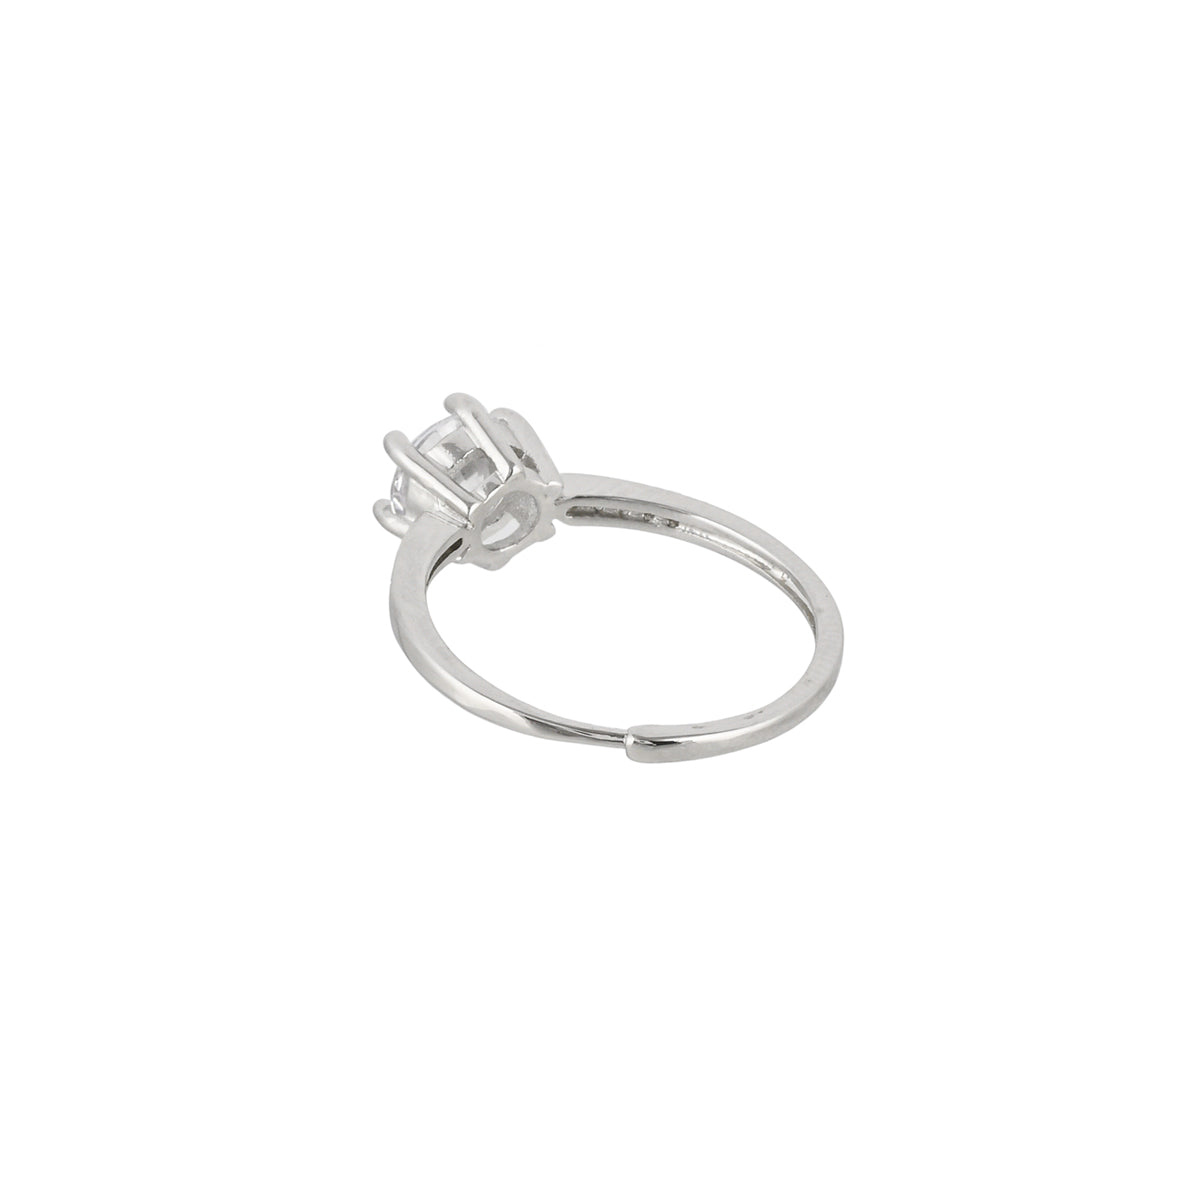 Classic Silver Plated Round Cut Zircon Adorned Ring